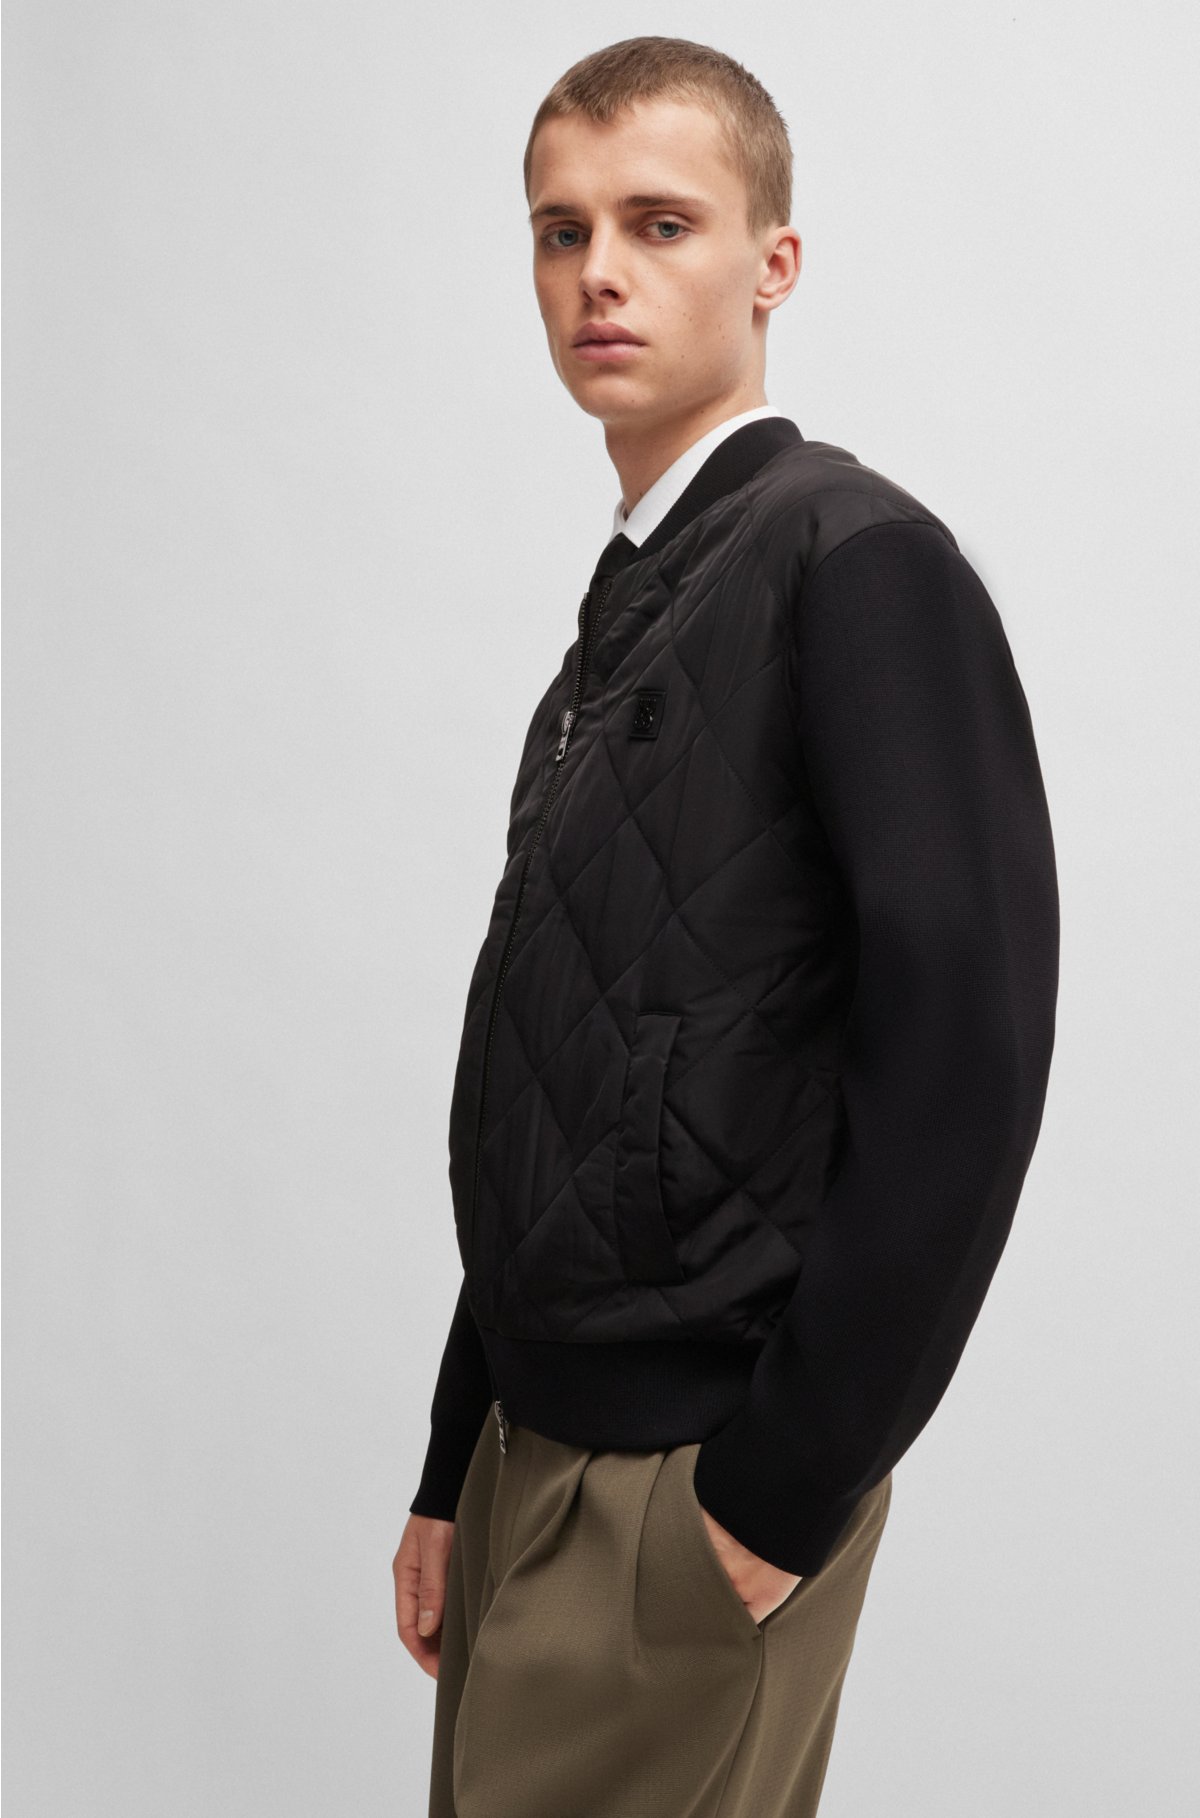 Mixed-material jacket with stacked-logo trim, Black